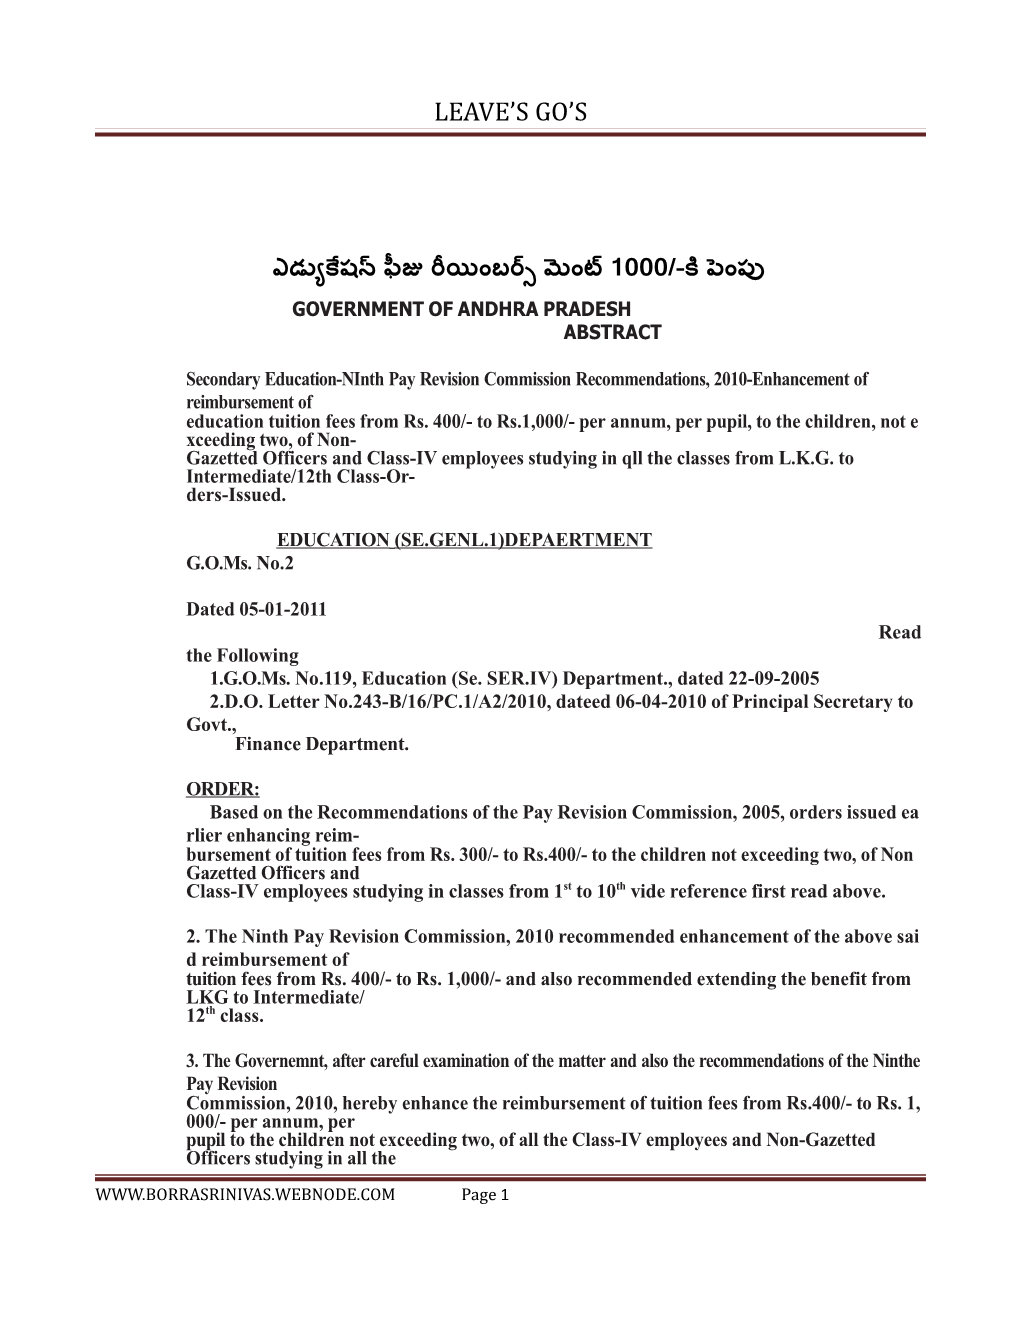 Secondary Education-Ninth Pay Revision Commission Recommendations, 2010-Enhancement Of